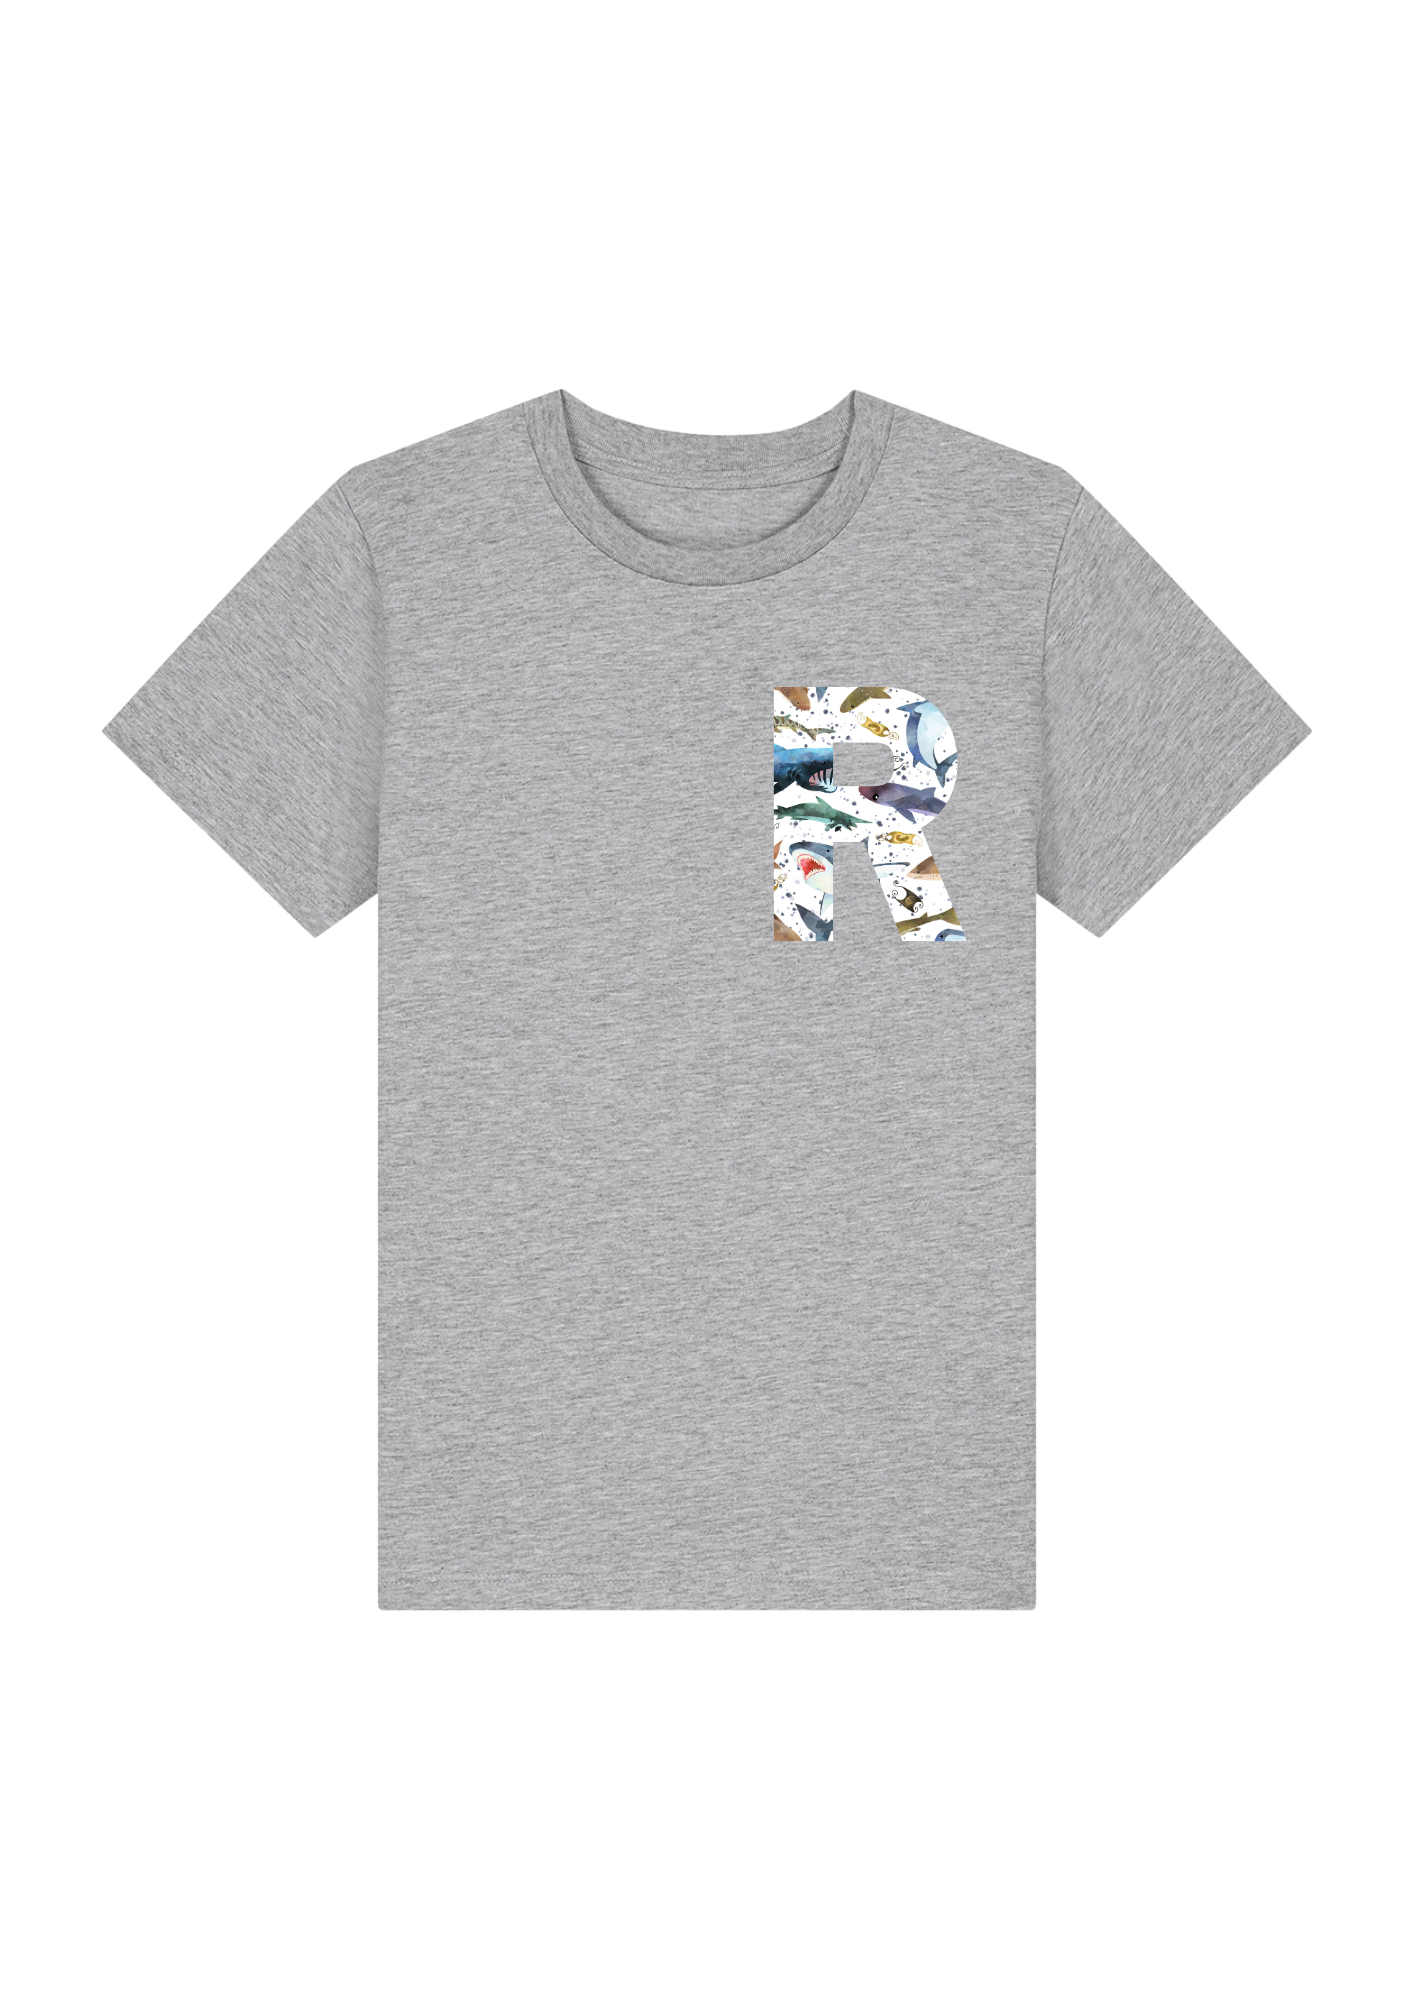 Small Initial T-Shirt